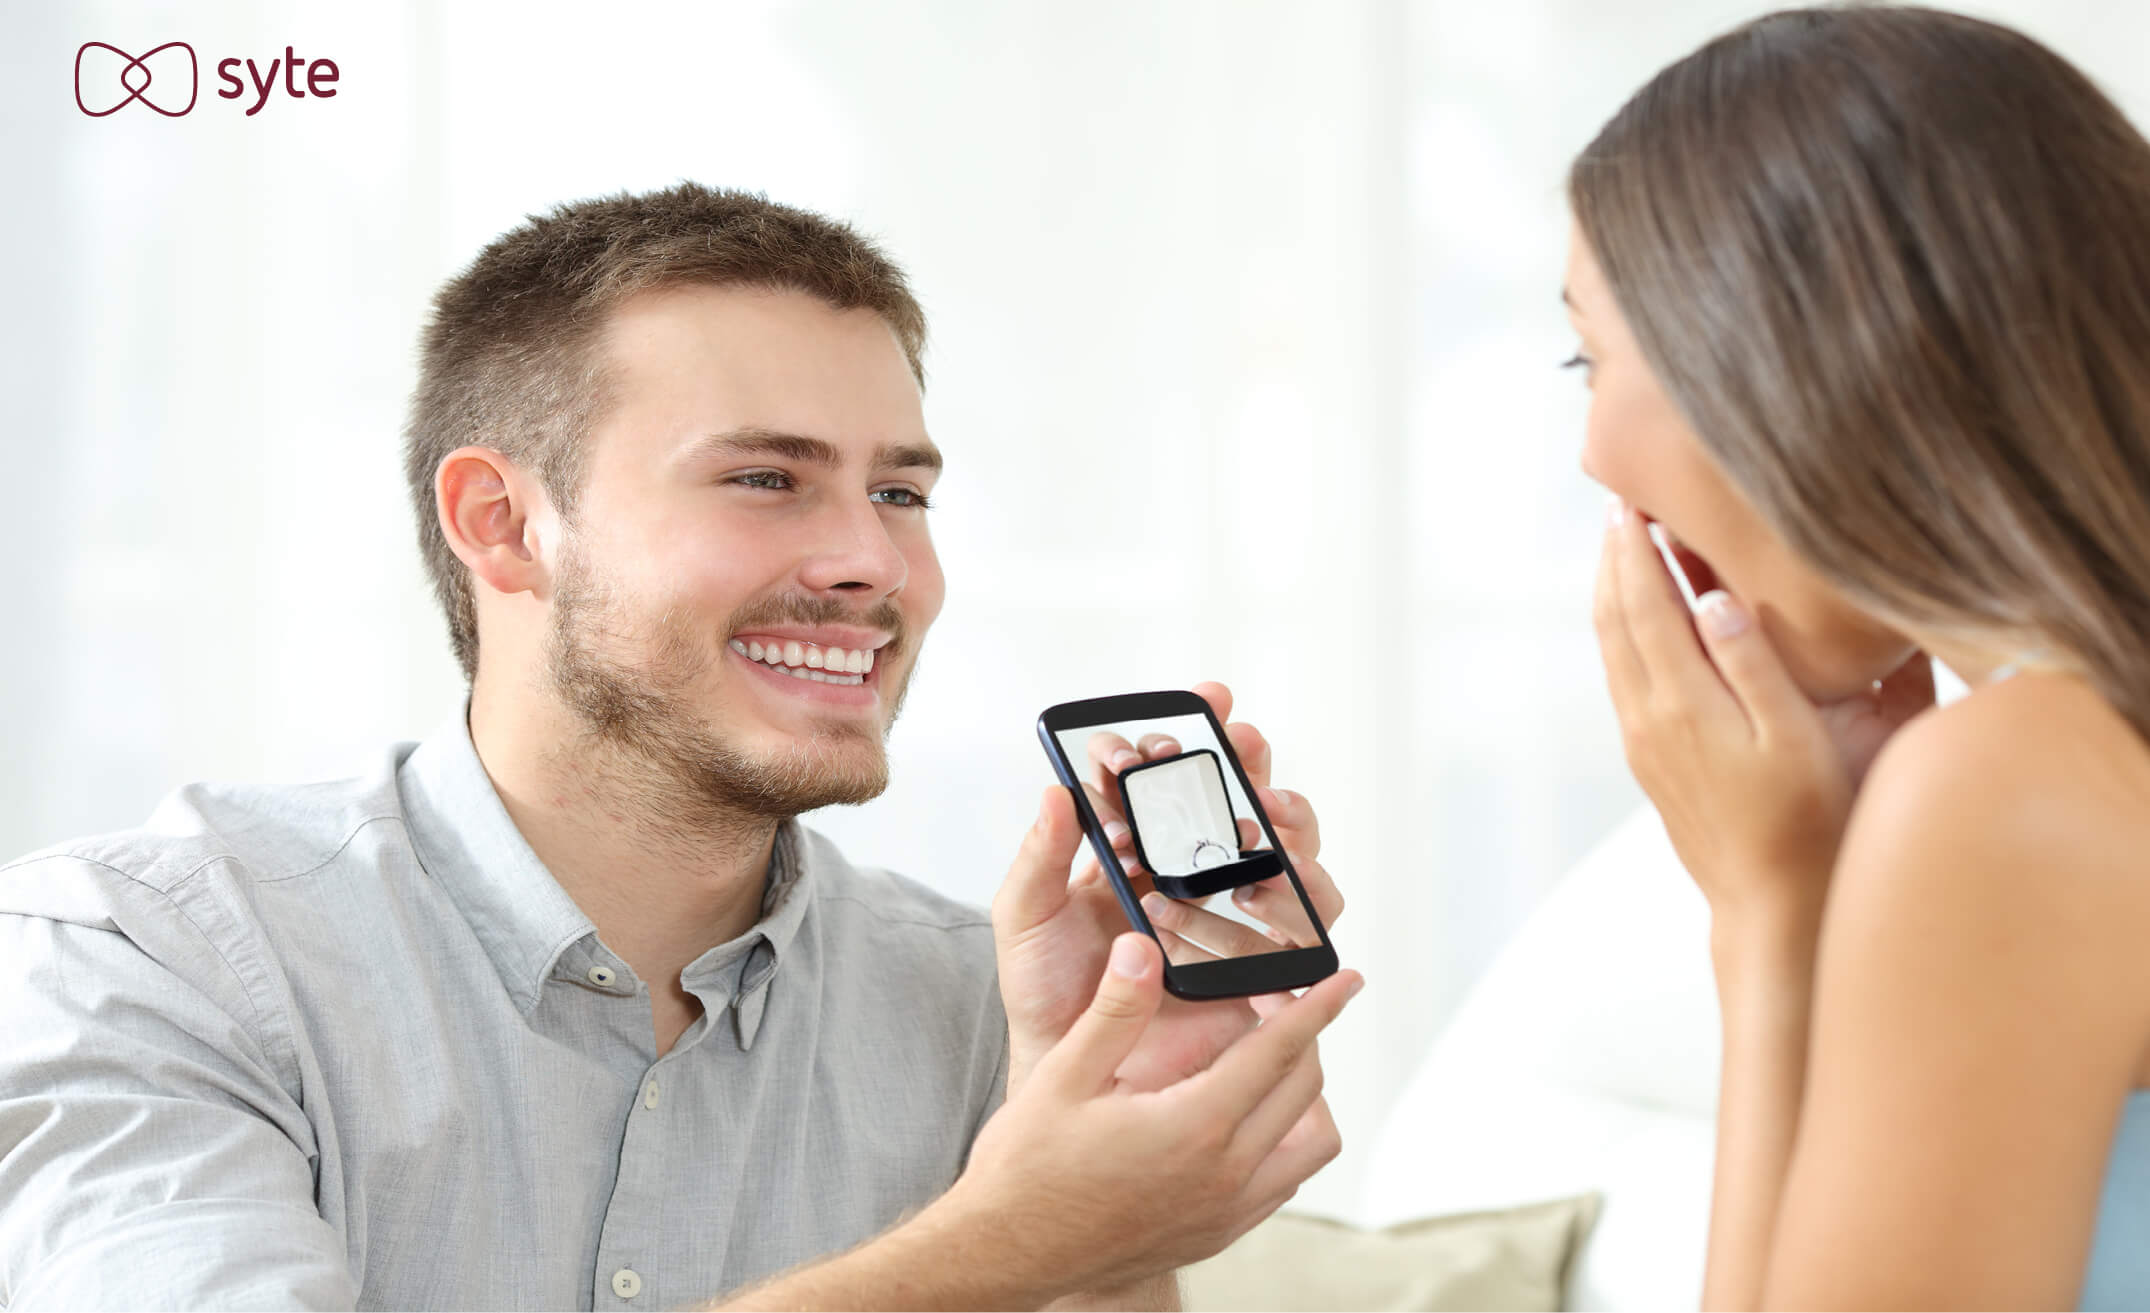 Product discovery for jewelry: A man asks a woman to marry him with a ring pictured inside a smartphone